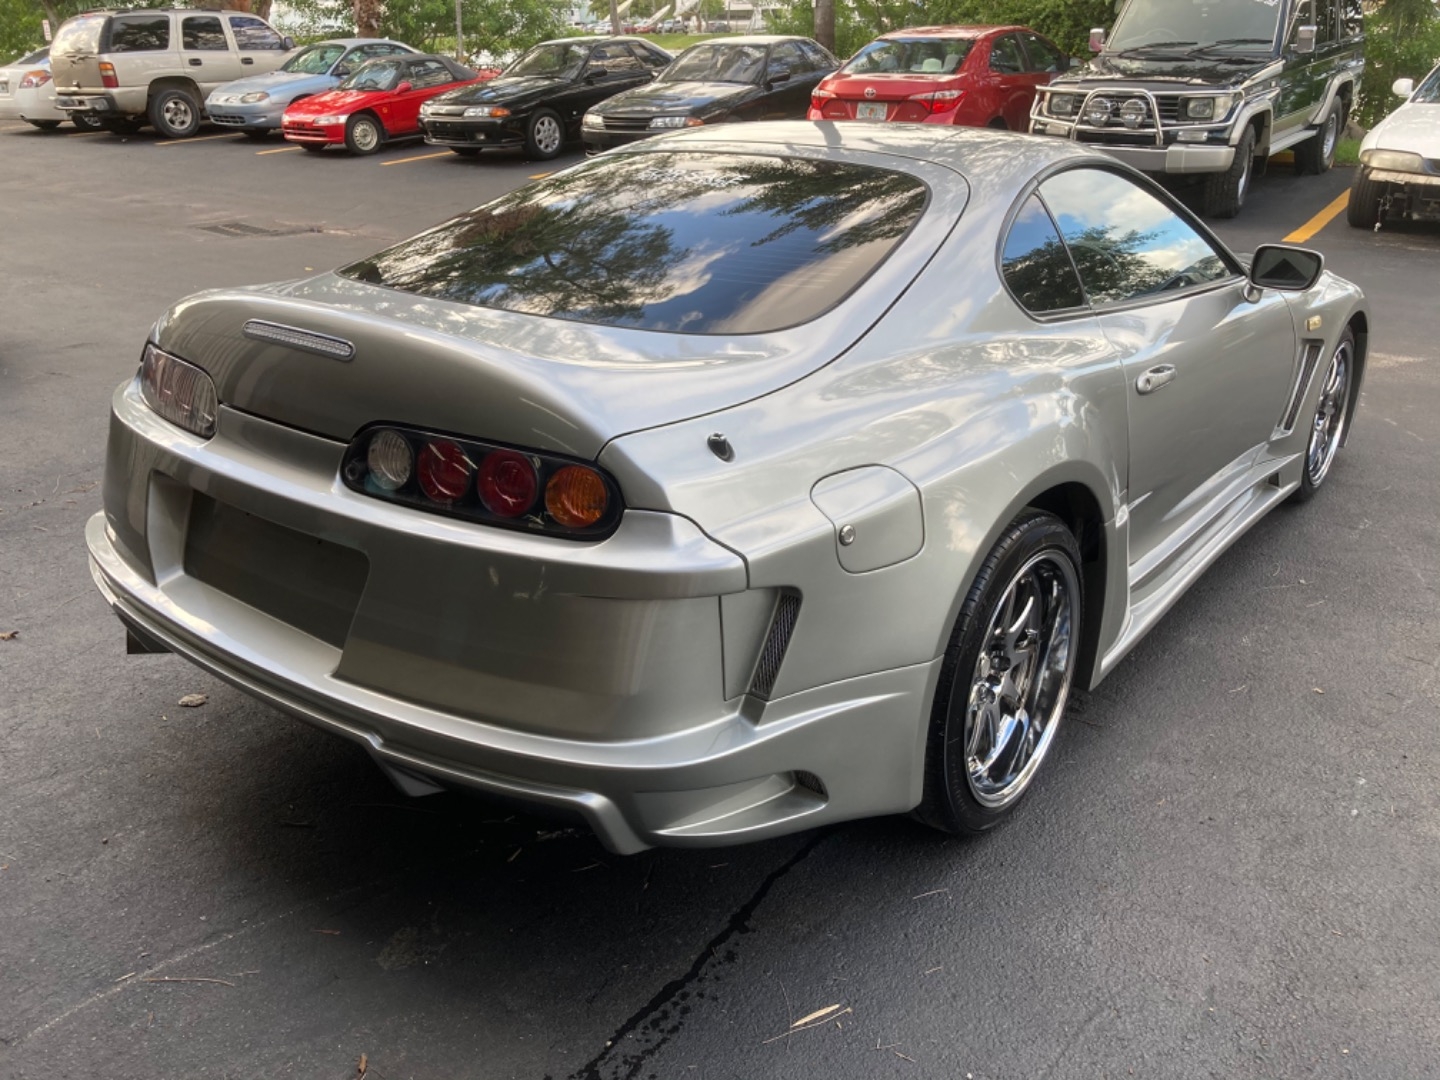 for-your-eyes-only-top-secret-jdm-1995-toyota-supra-rz-twin-turbo27102020094753 95676